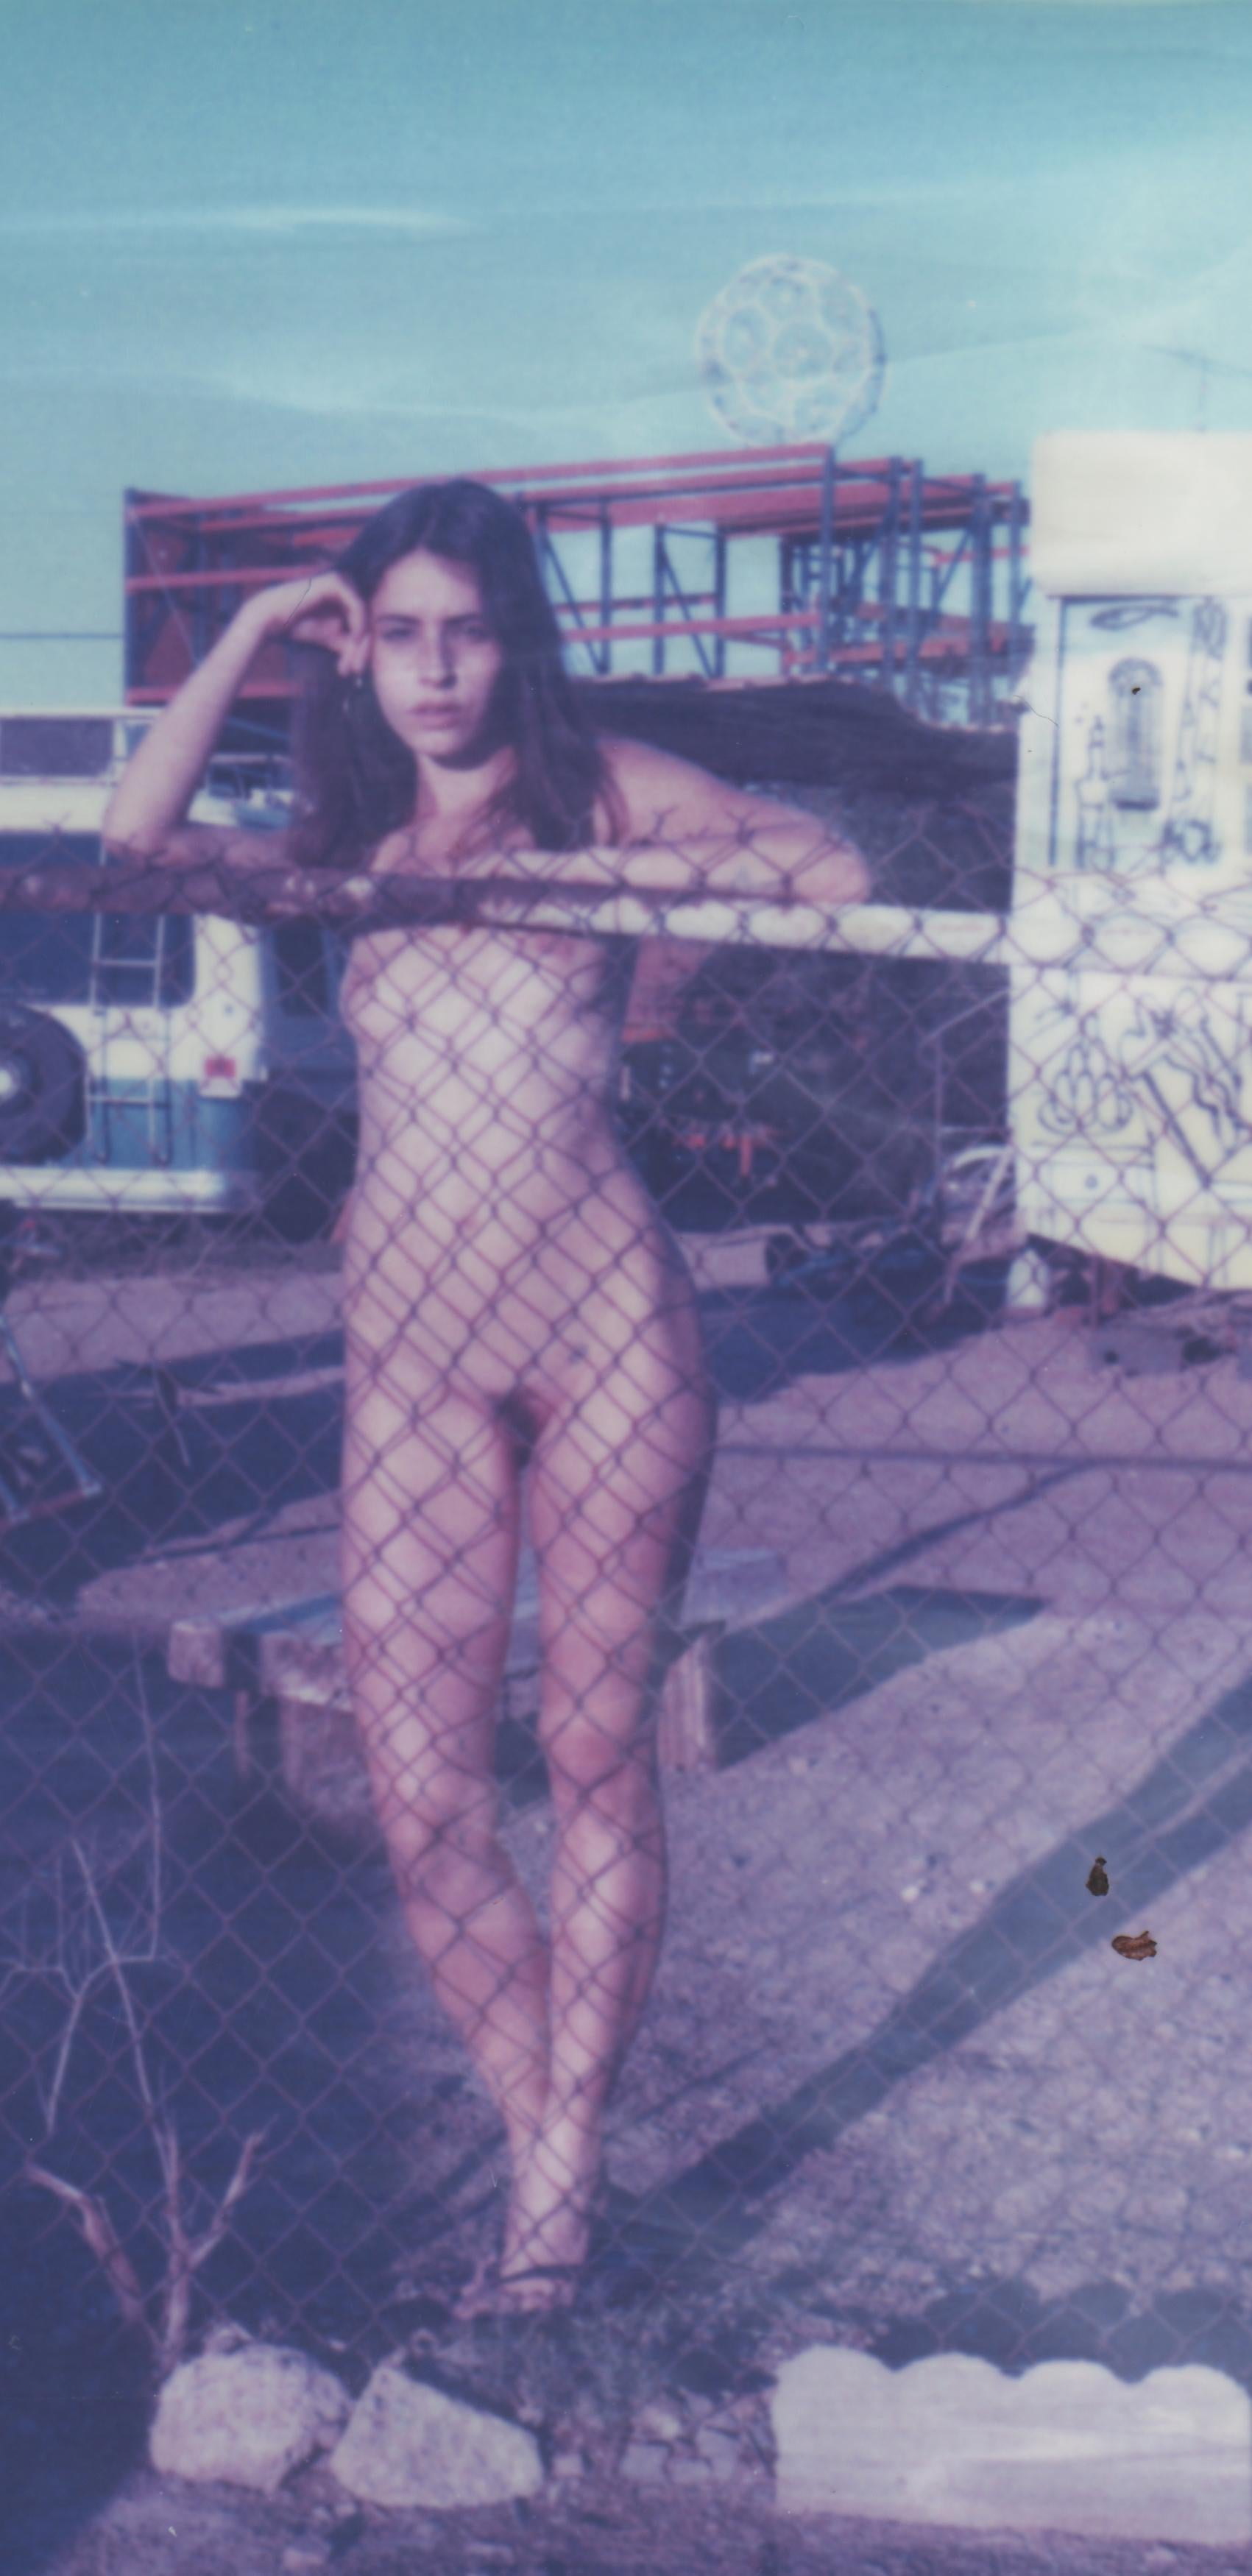 Don't fence me in - Contemporary, Polaroid, Nude, Color 1